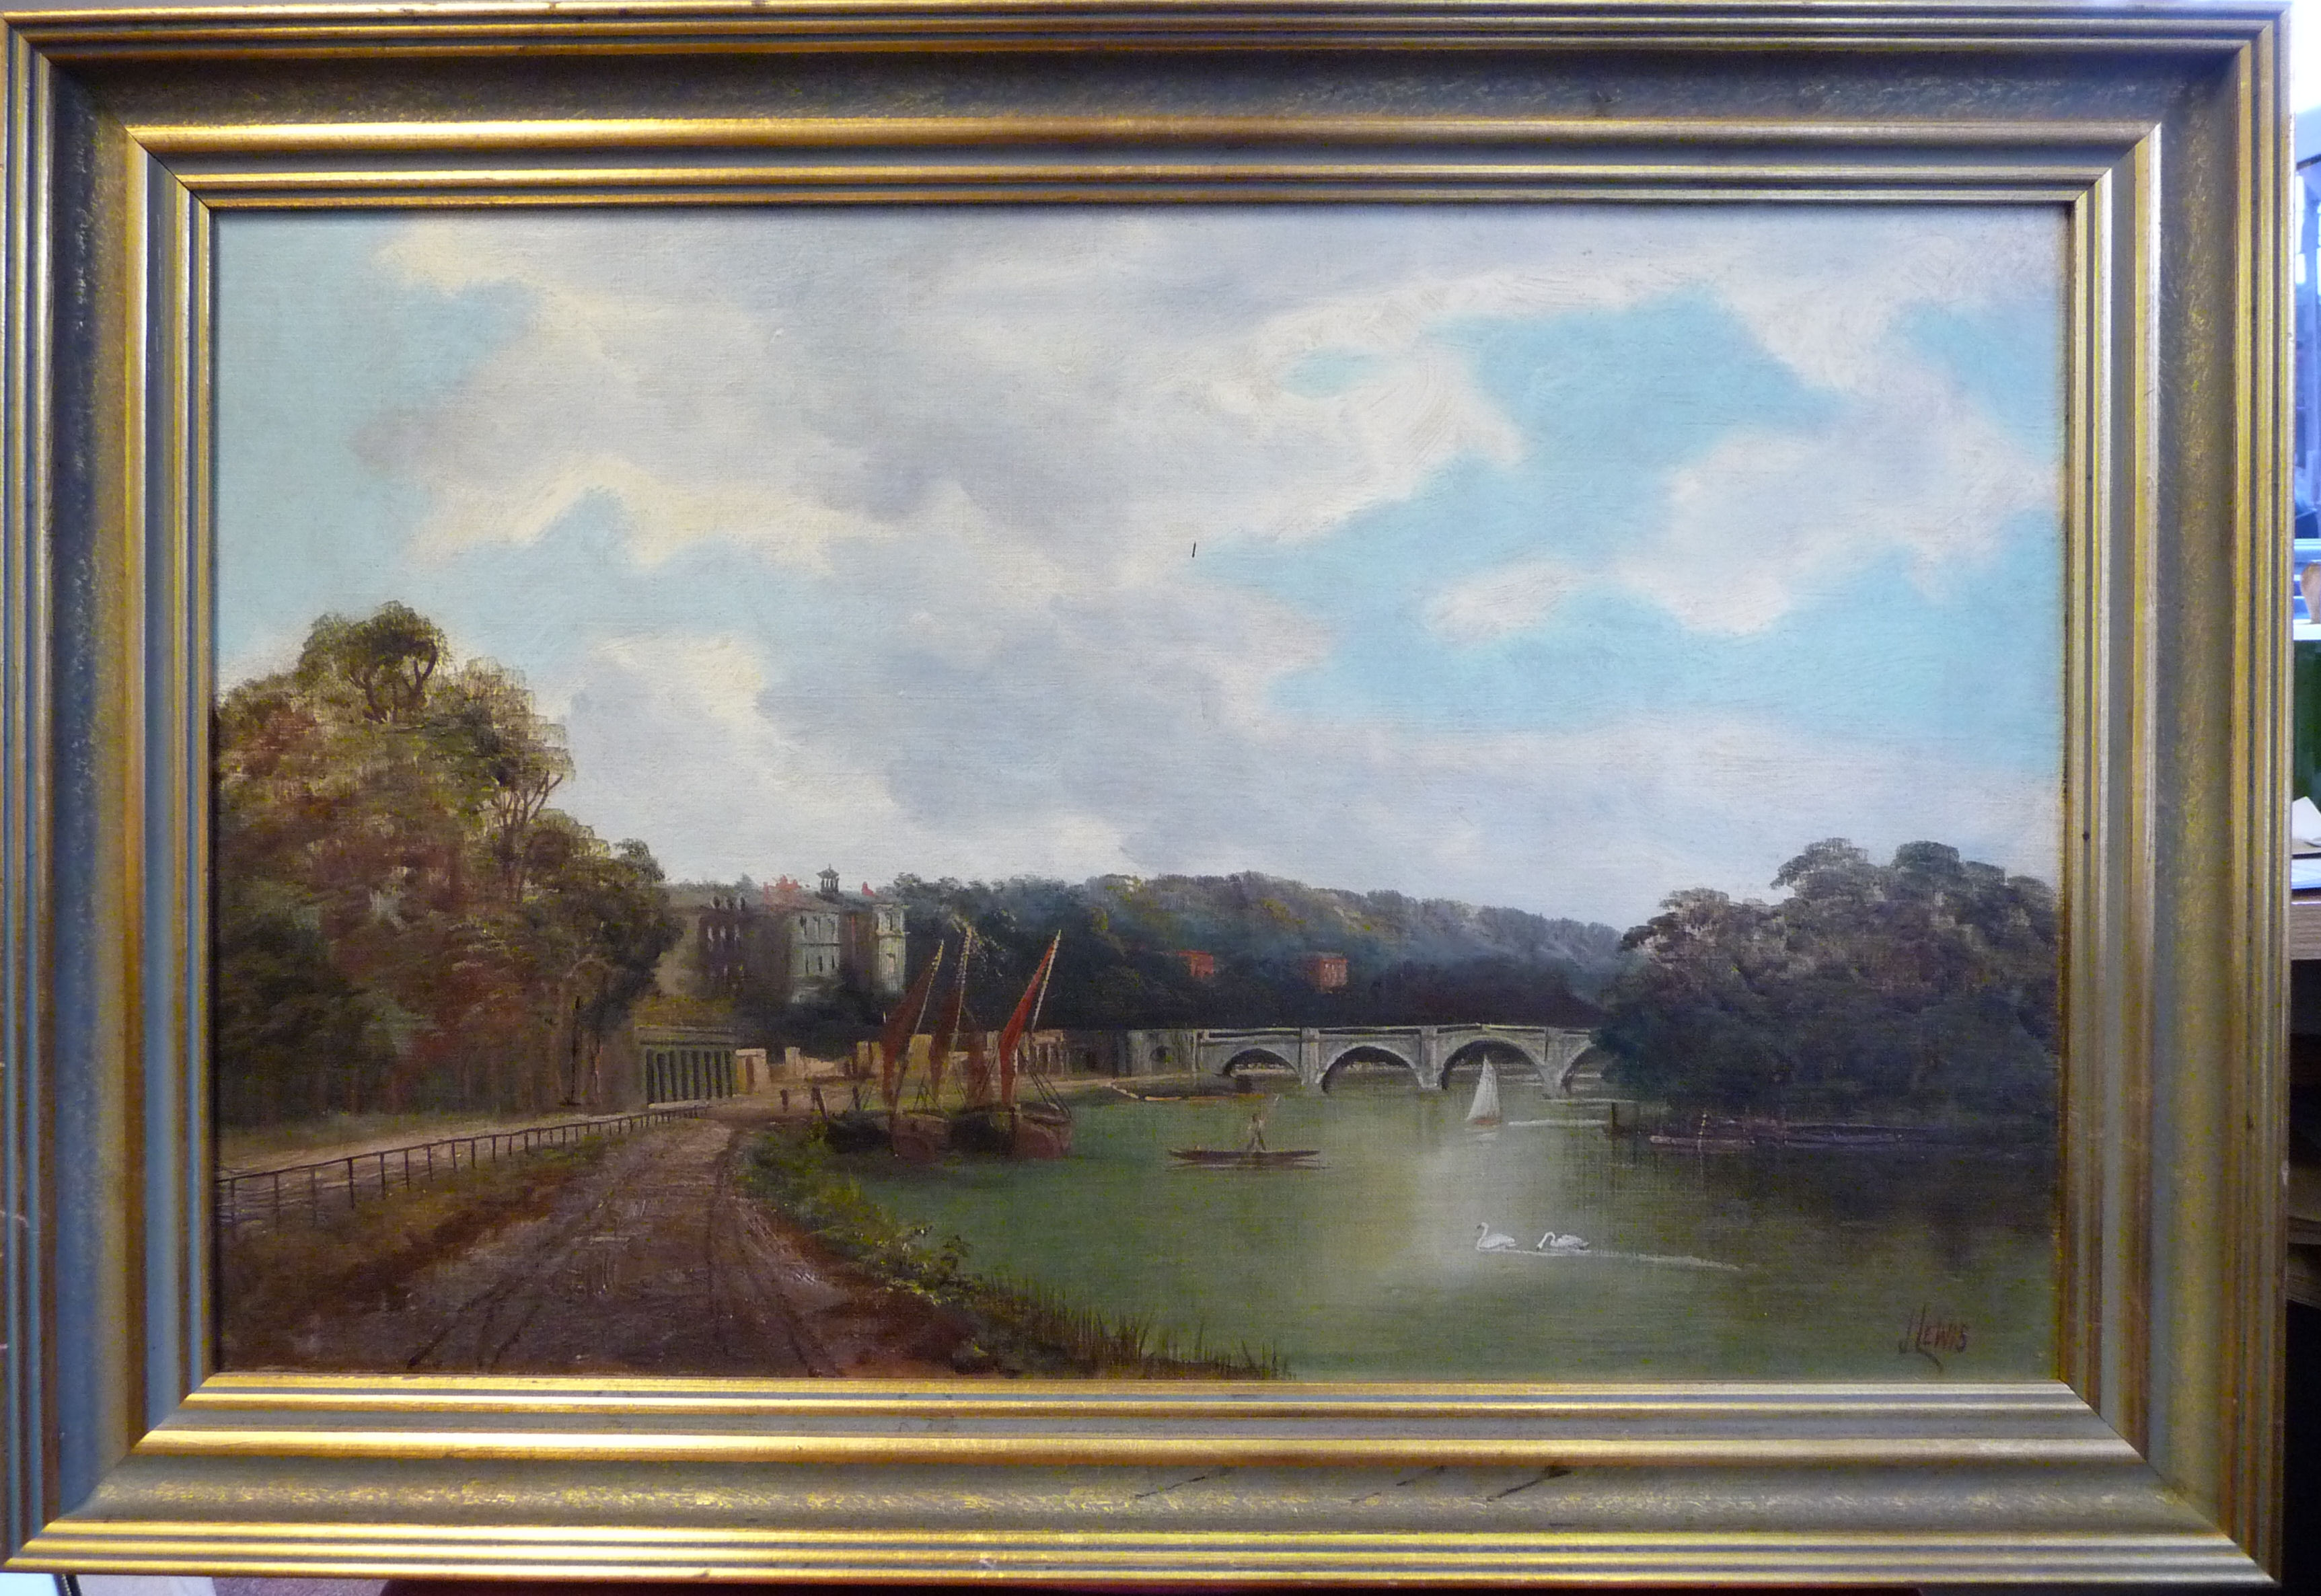 J Lewis - 'The Thames at Richmond' with swans and a figure in a punt in the foreground oil on